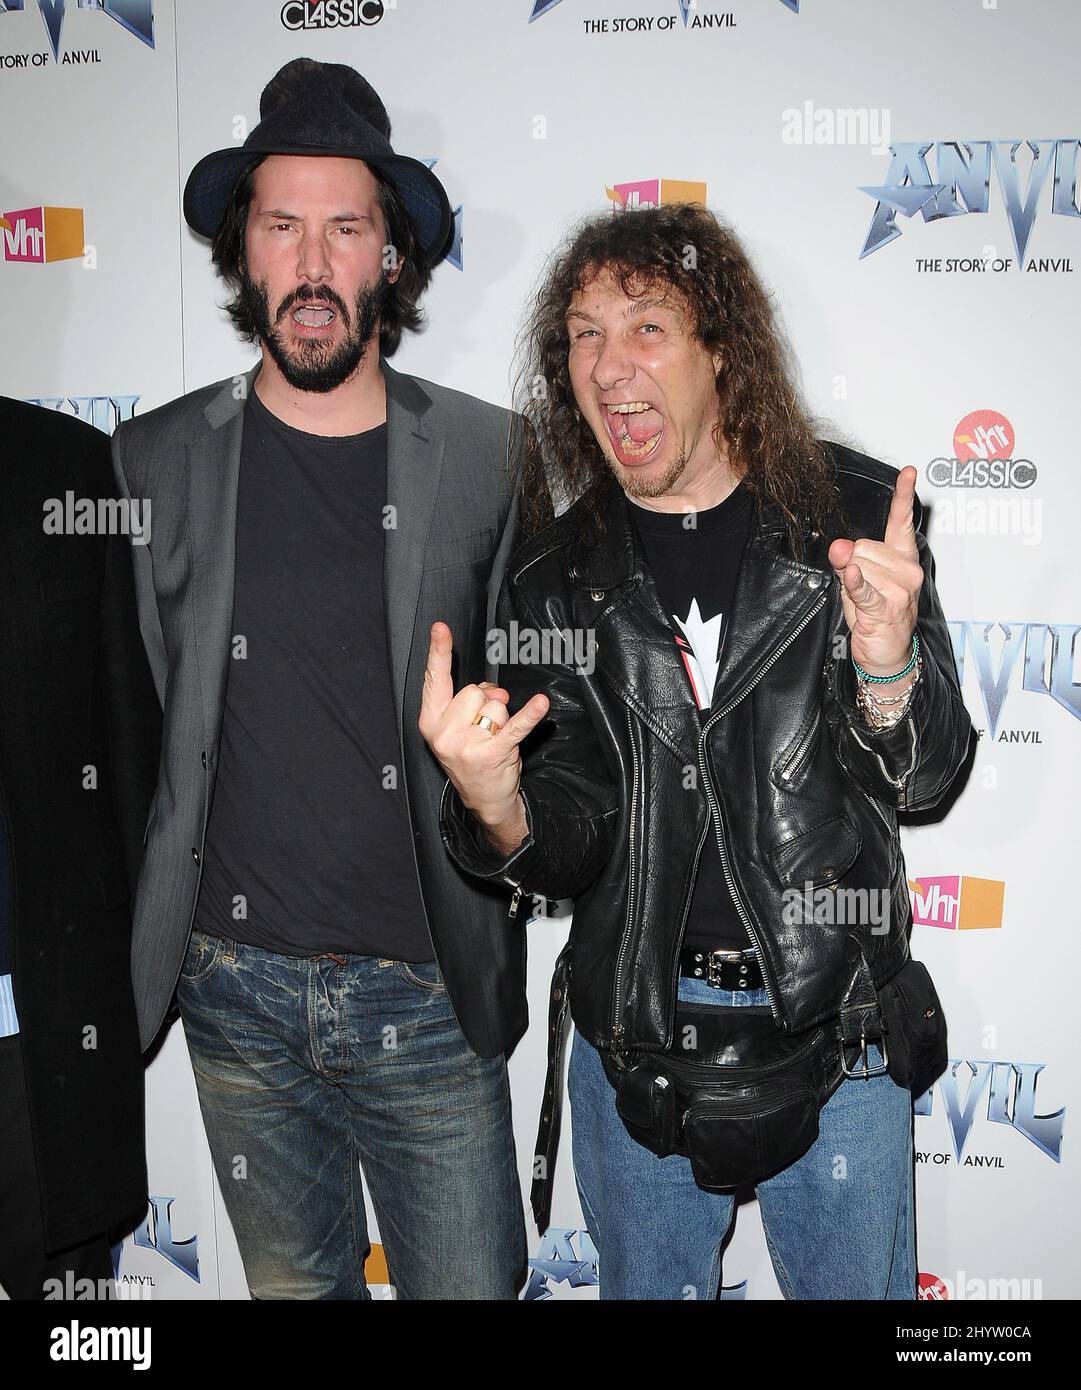 Keanu Reeves and Steve 'Lips' Kudlow at the film premiere of 'Anvil! The Story of Anvil' at the Egyptian Theatre, Hollywood, California Stock Photo